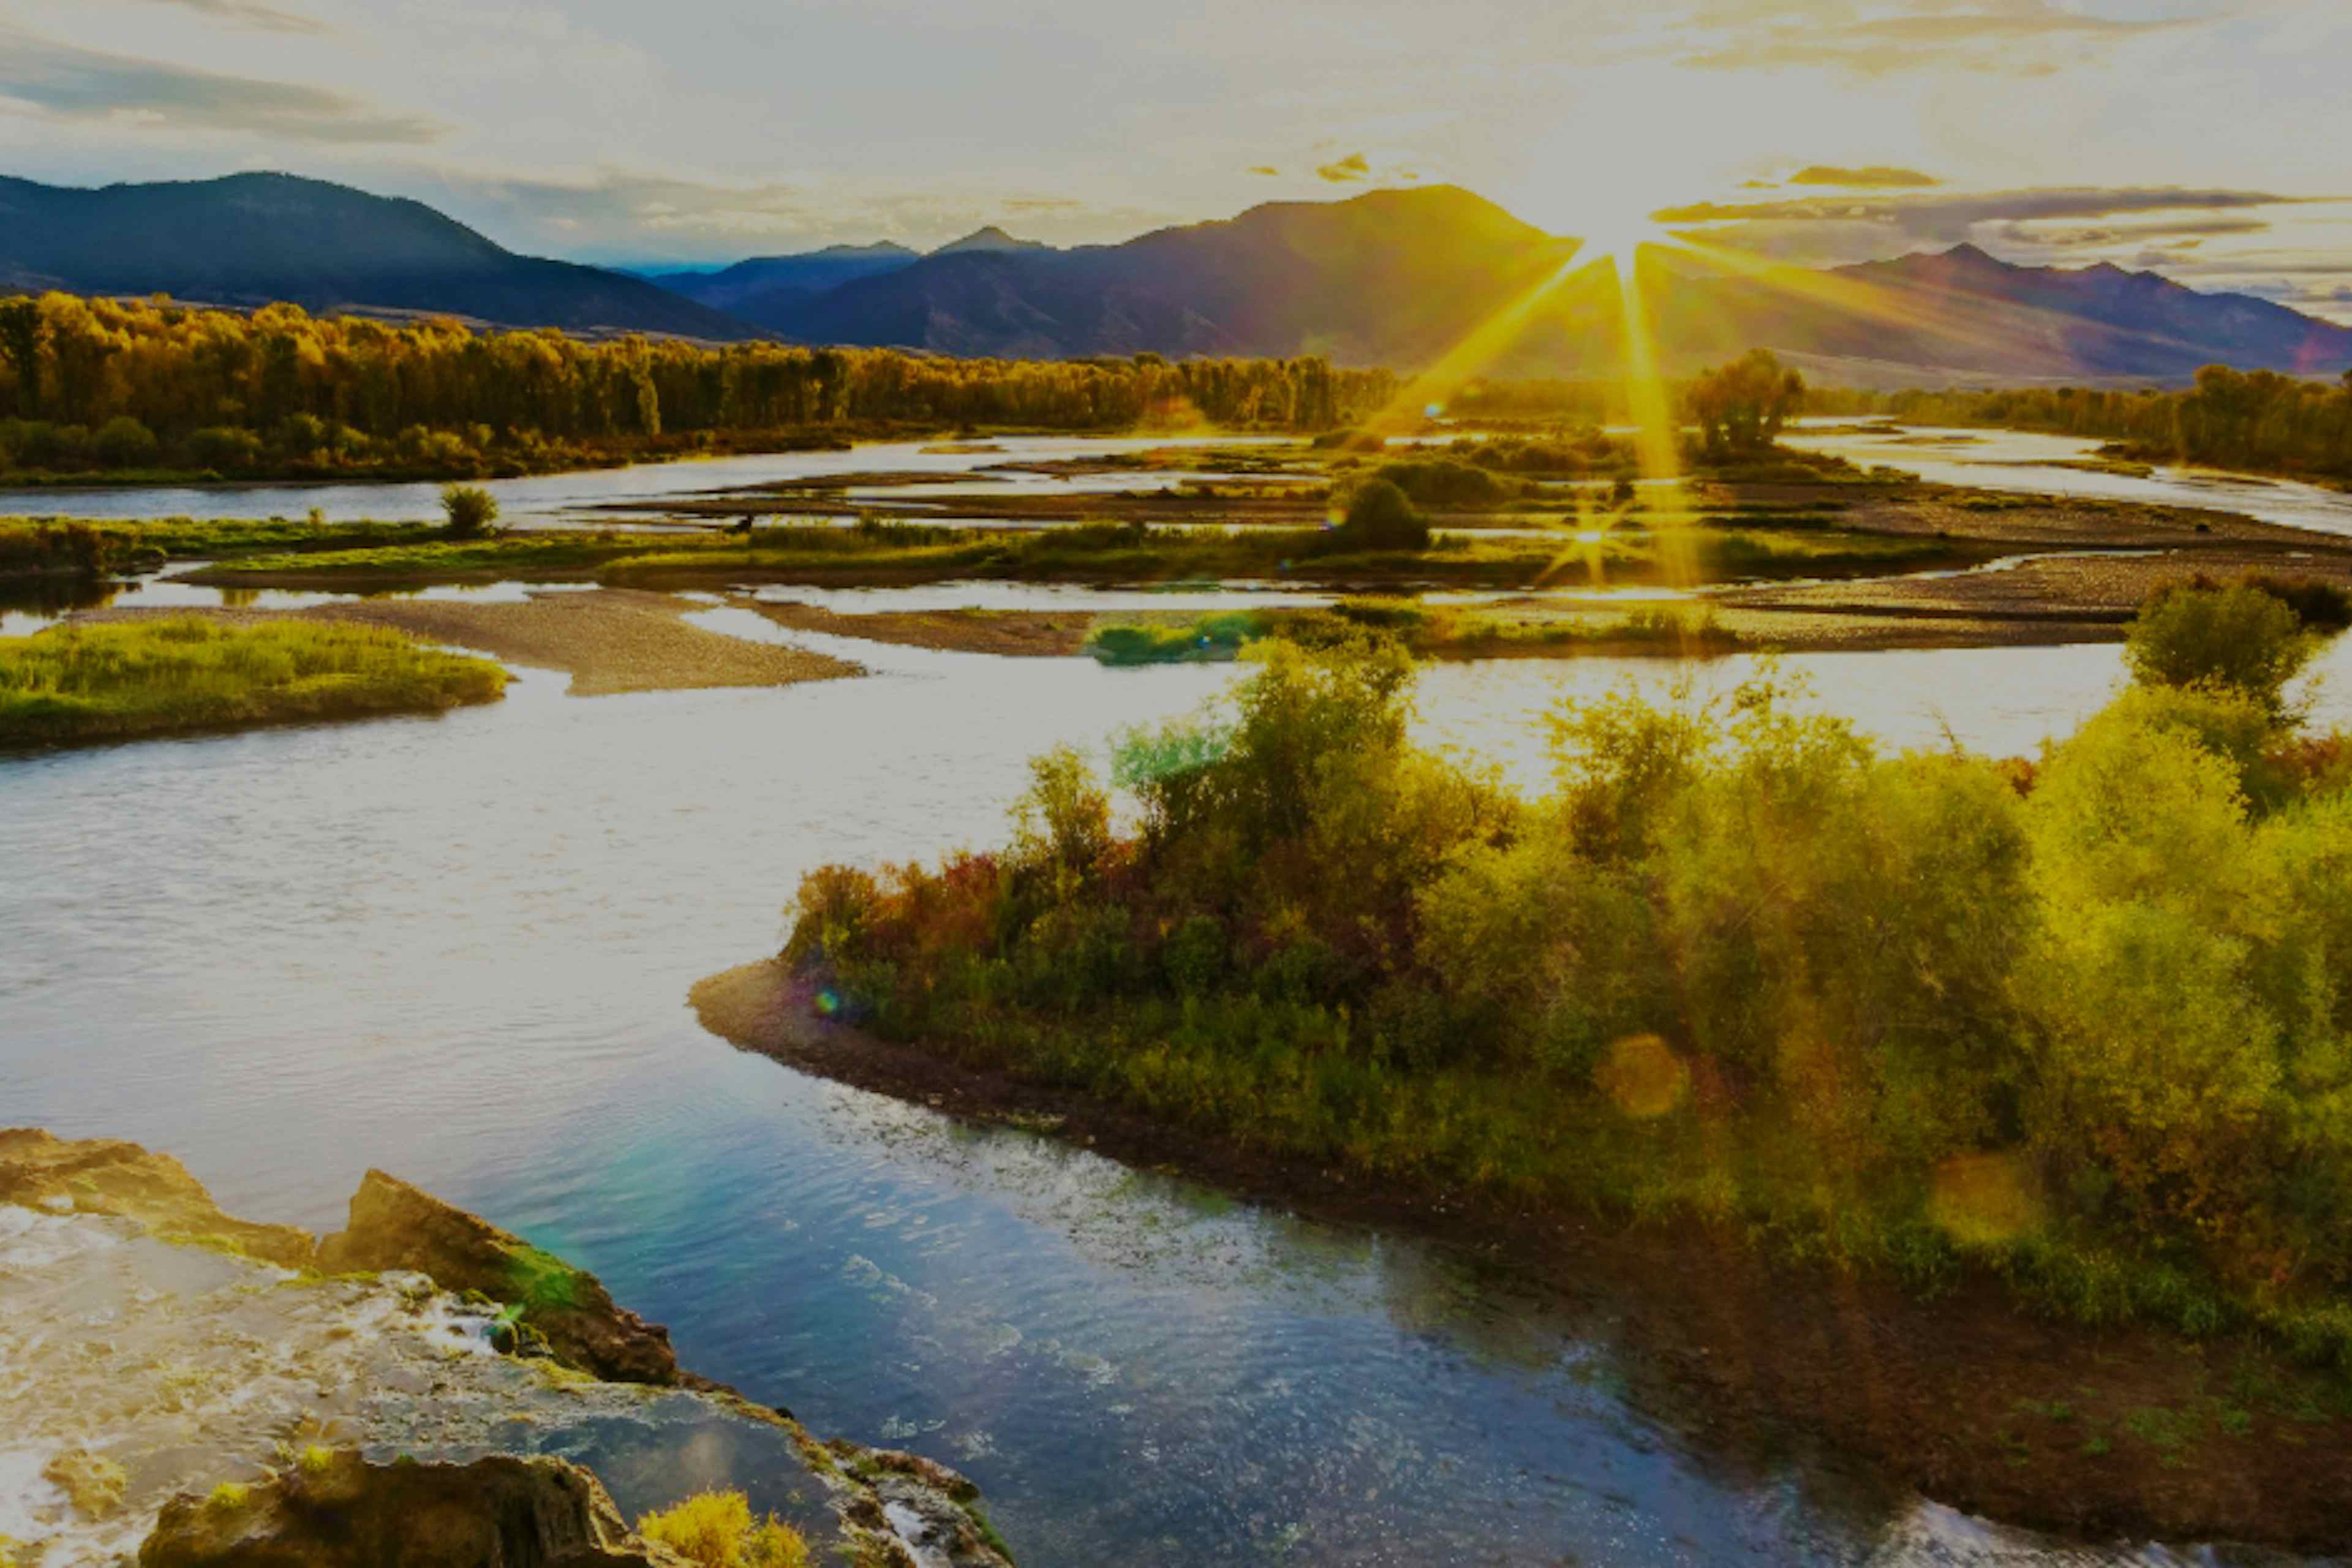 The sun rises over Swan Valley, ID and the South Fork of the Snake River.